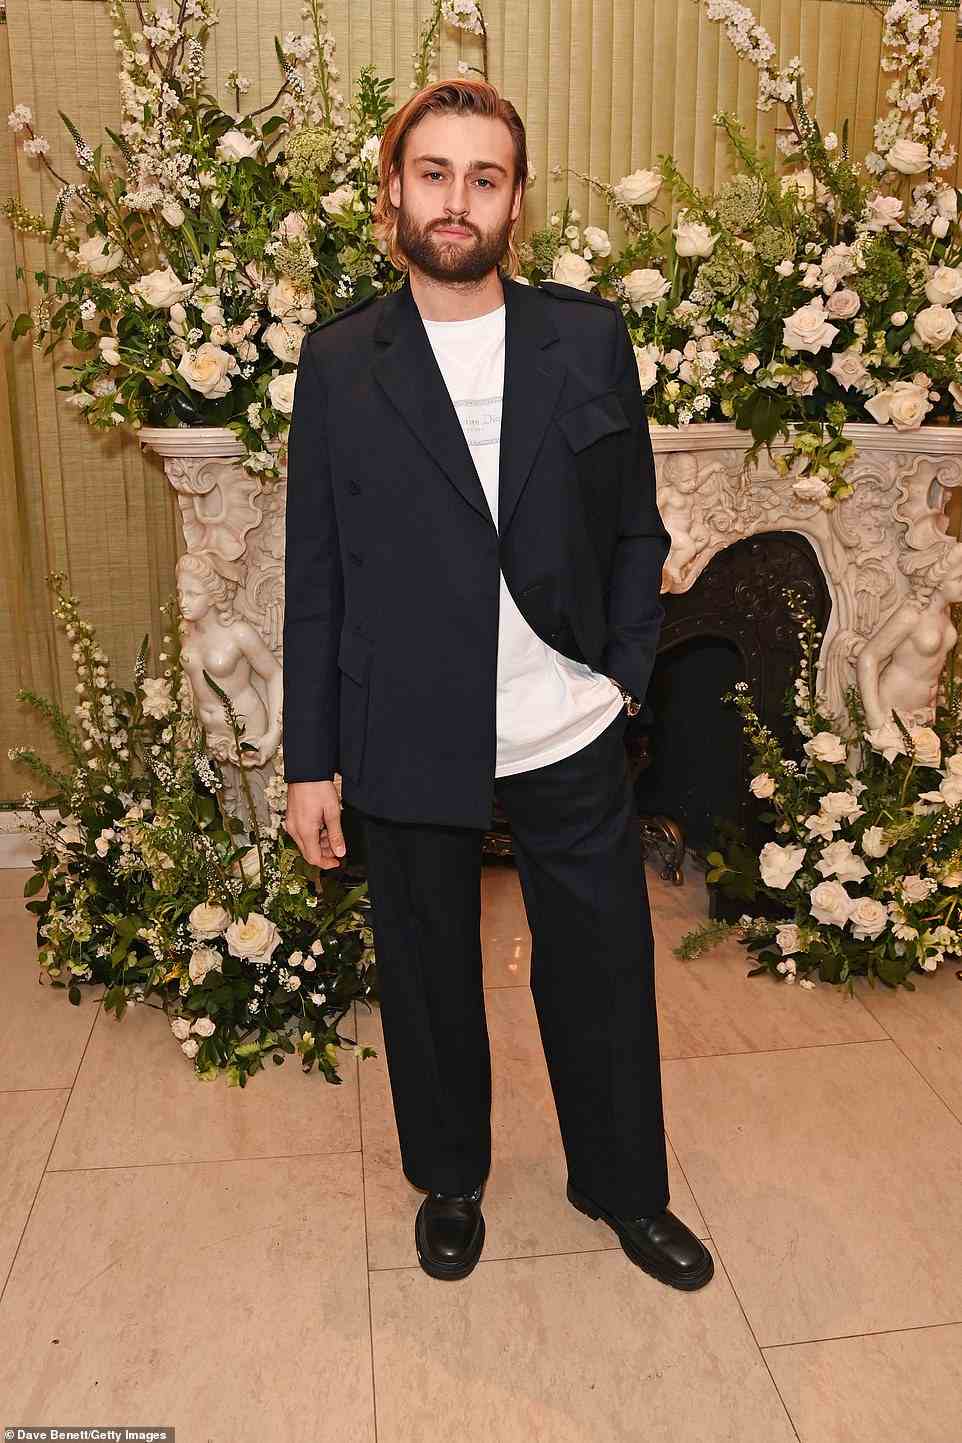 Smart: Actor Douglas Booth cut a smart figure in a black suit, which he wore over a casual white T-shirt as he joined the star-studded guest list